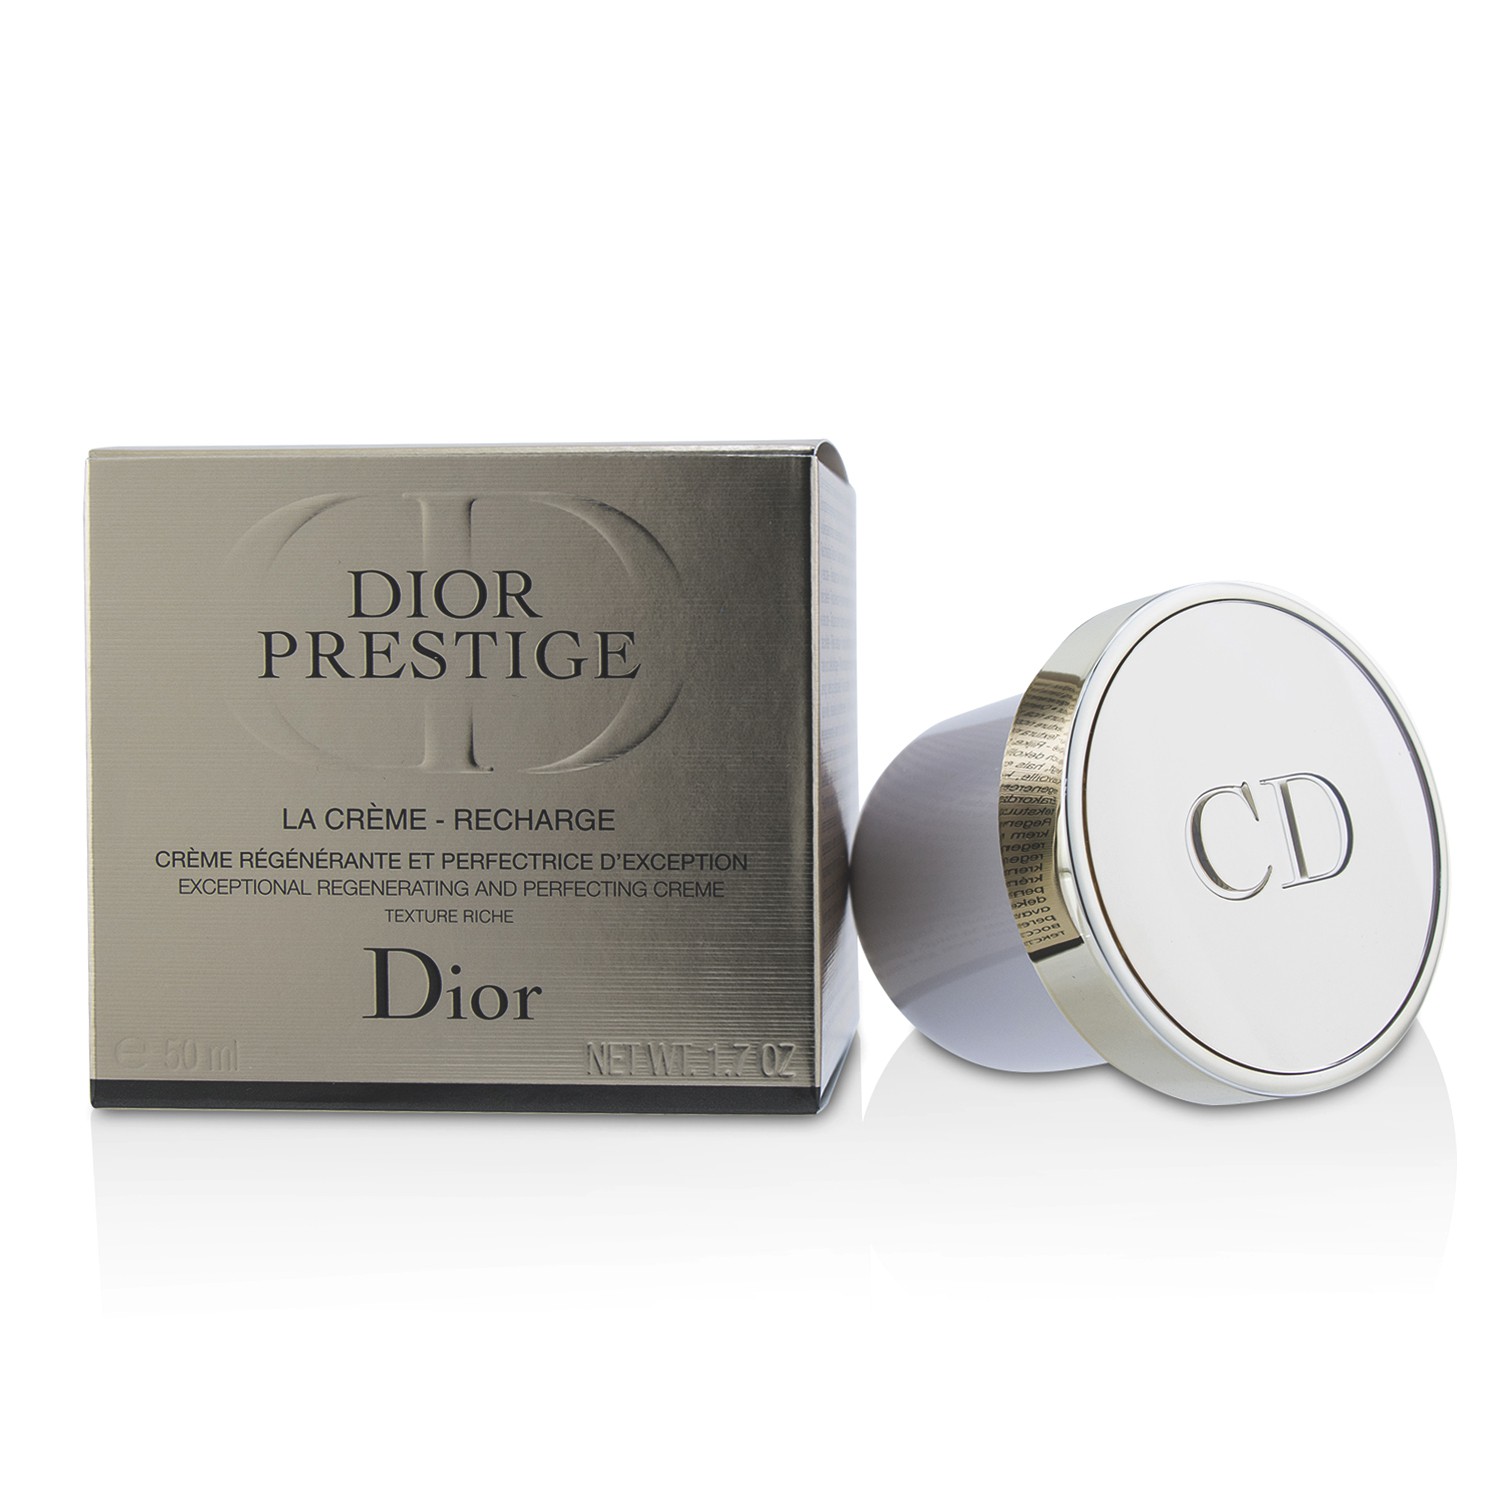 Prestige La Creme Exceptional Regenerating And Perfecting Rich Creme - Recharge Christian Dior Image